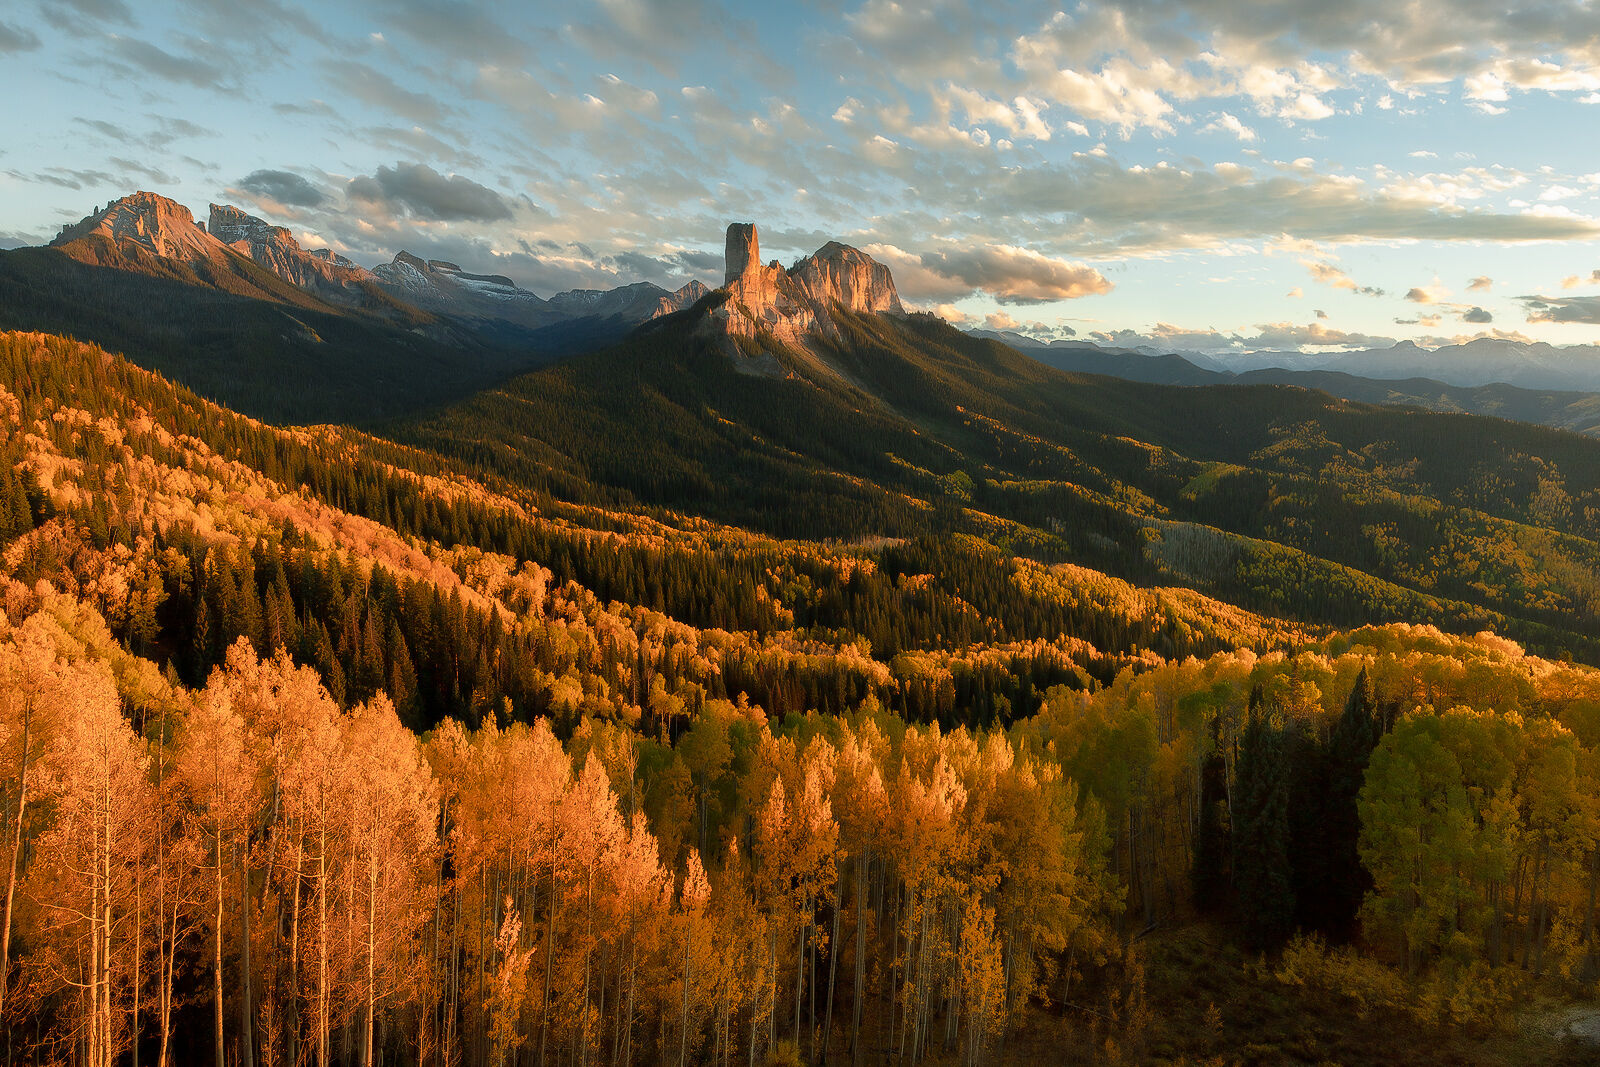 A tall, columnar rock stands in the background with bright yellow aspen trees shining their leaves as the sun lights up the scene from the side as it sets.